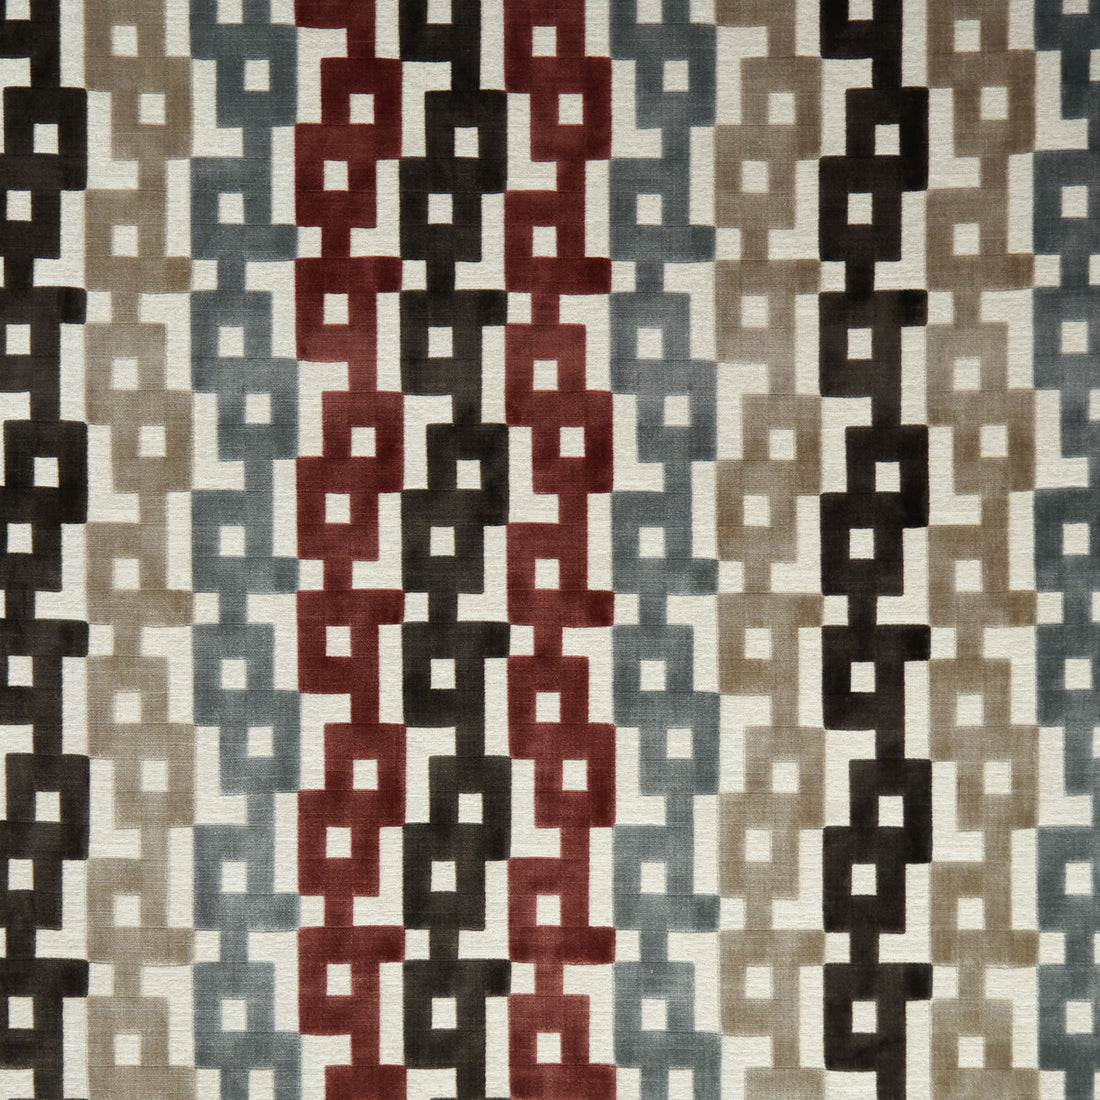 Chain Velvet fabric in paprika/grey color - pattern 35856.921.0 - by Kravet Couture